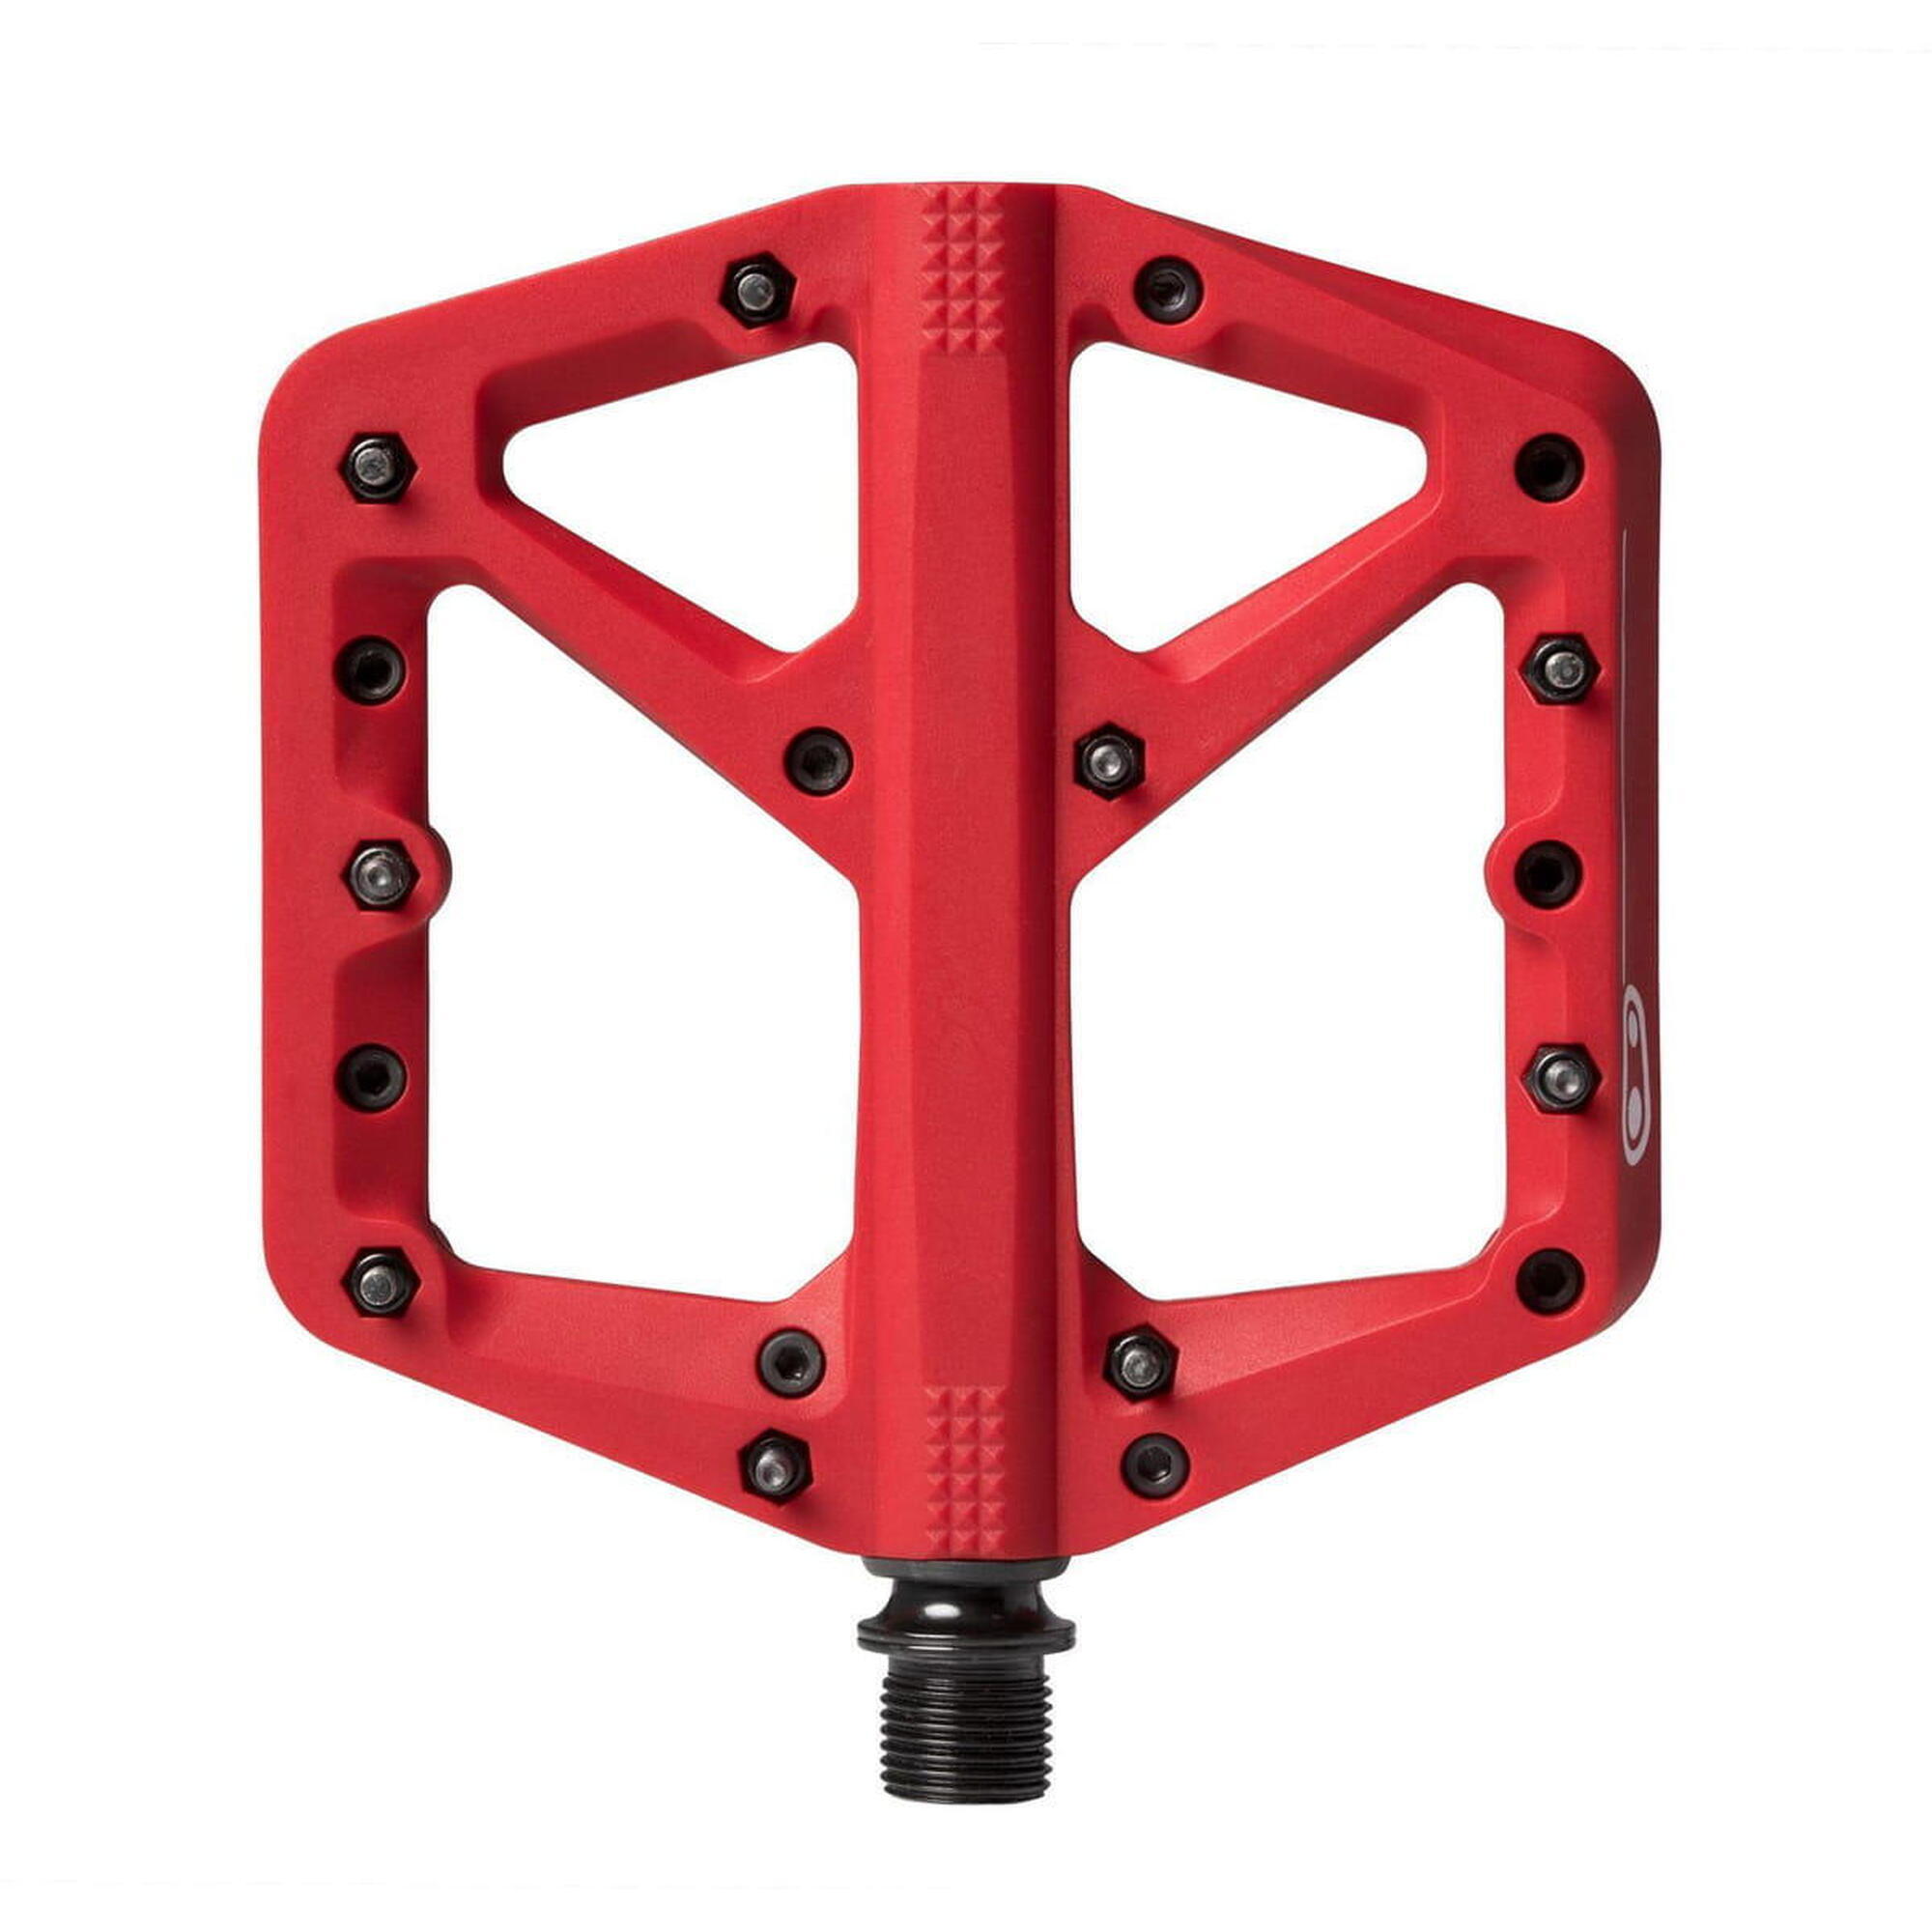 CRANKBROTHERS Crankbrothers Pedals Stamp 1 Large - Red